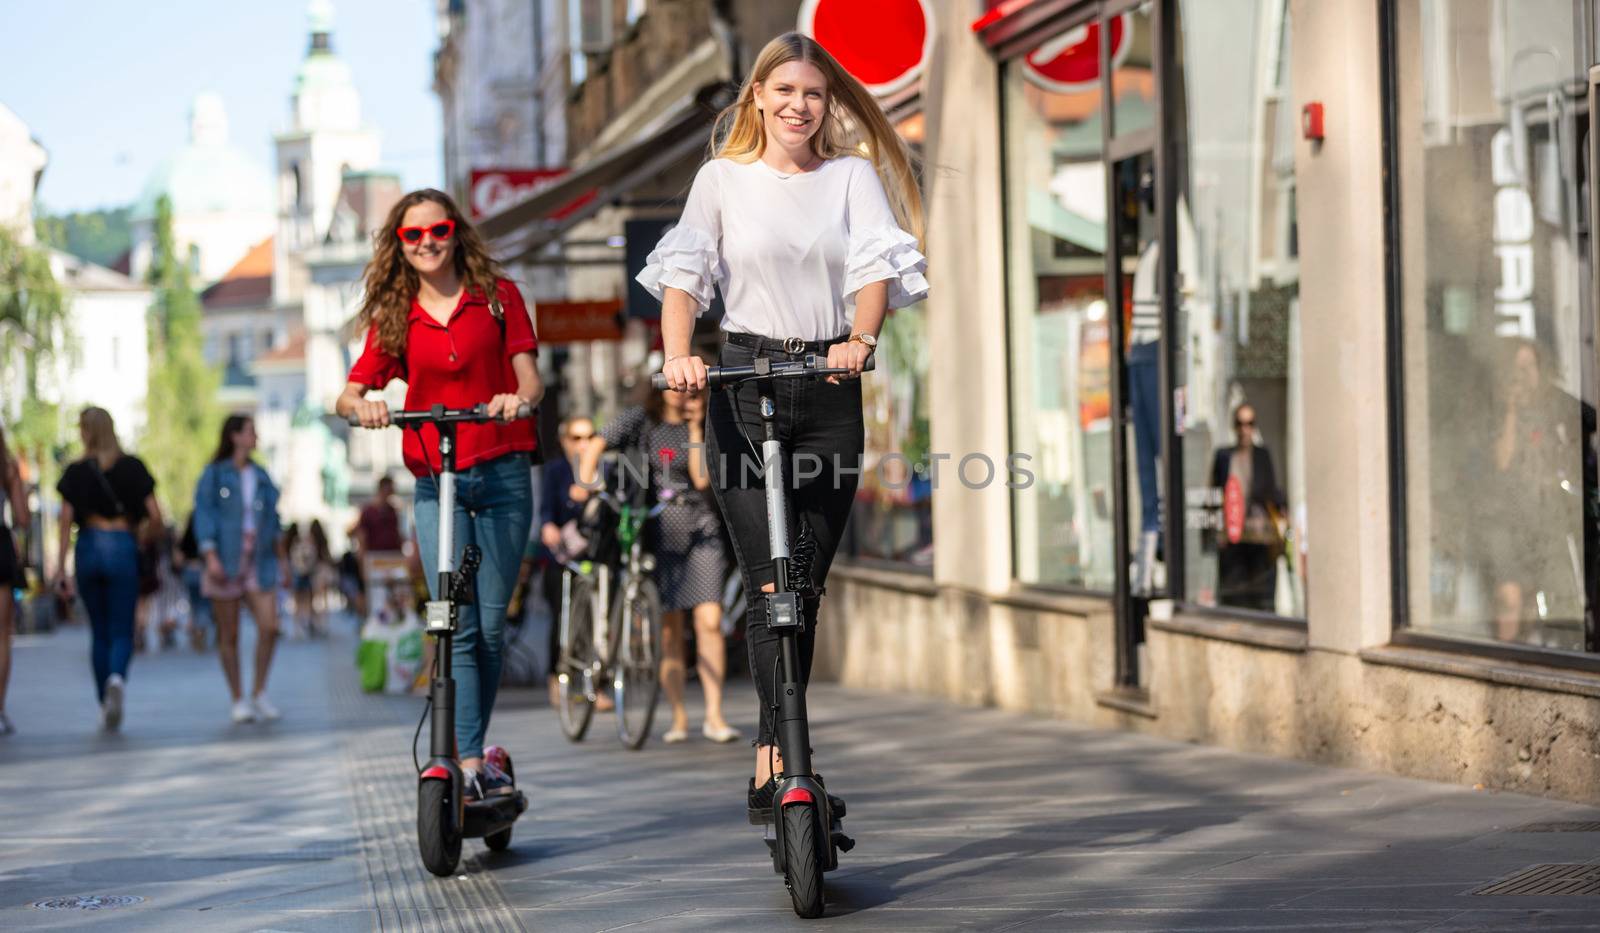 Trendy fashinable teenager girls riding public rental electric scooters in urban city environment. New eco-friendly modern public city transport in Ljubljana, Slovenia by kasto